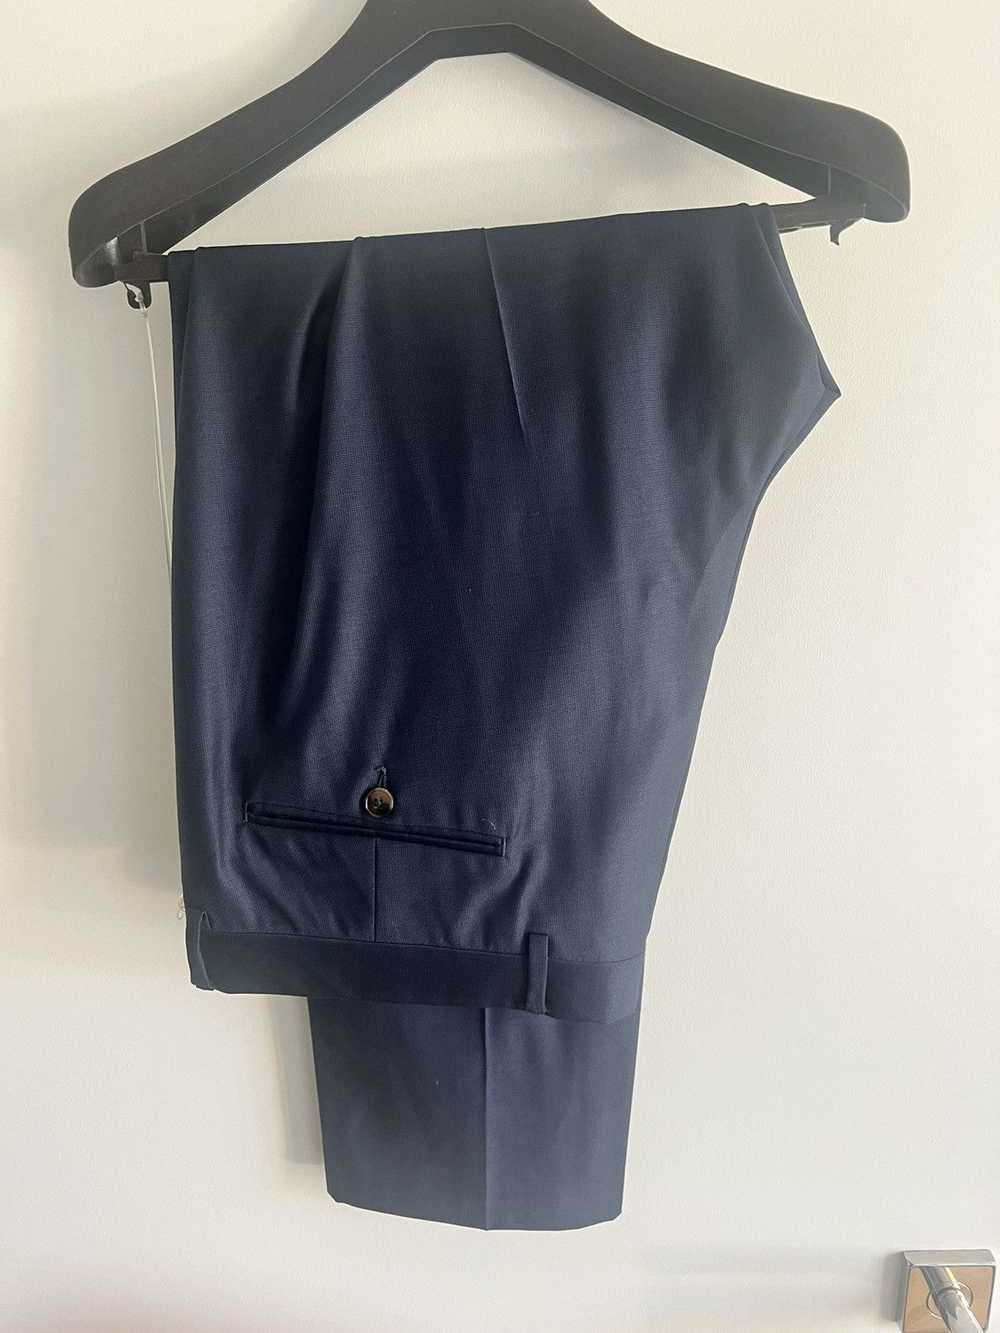 Gucci Gucci Suit in Navy Birdseye Wool Size US44/… - image 10